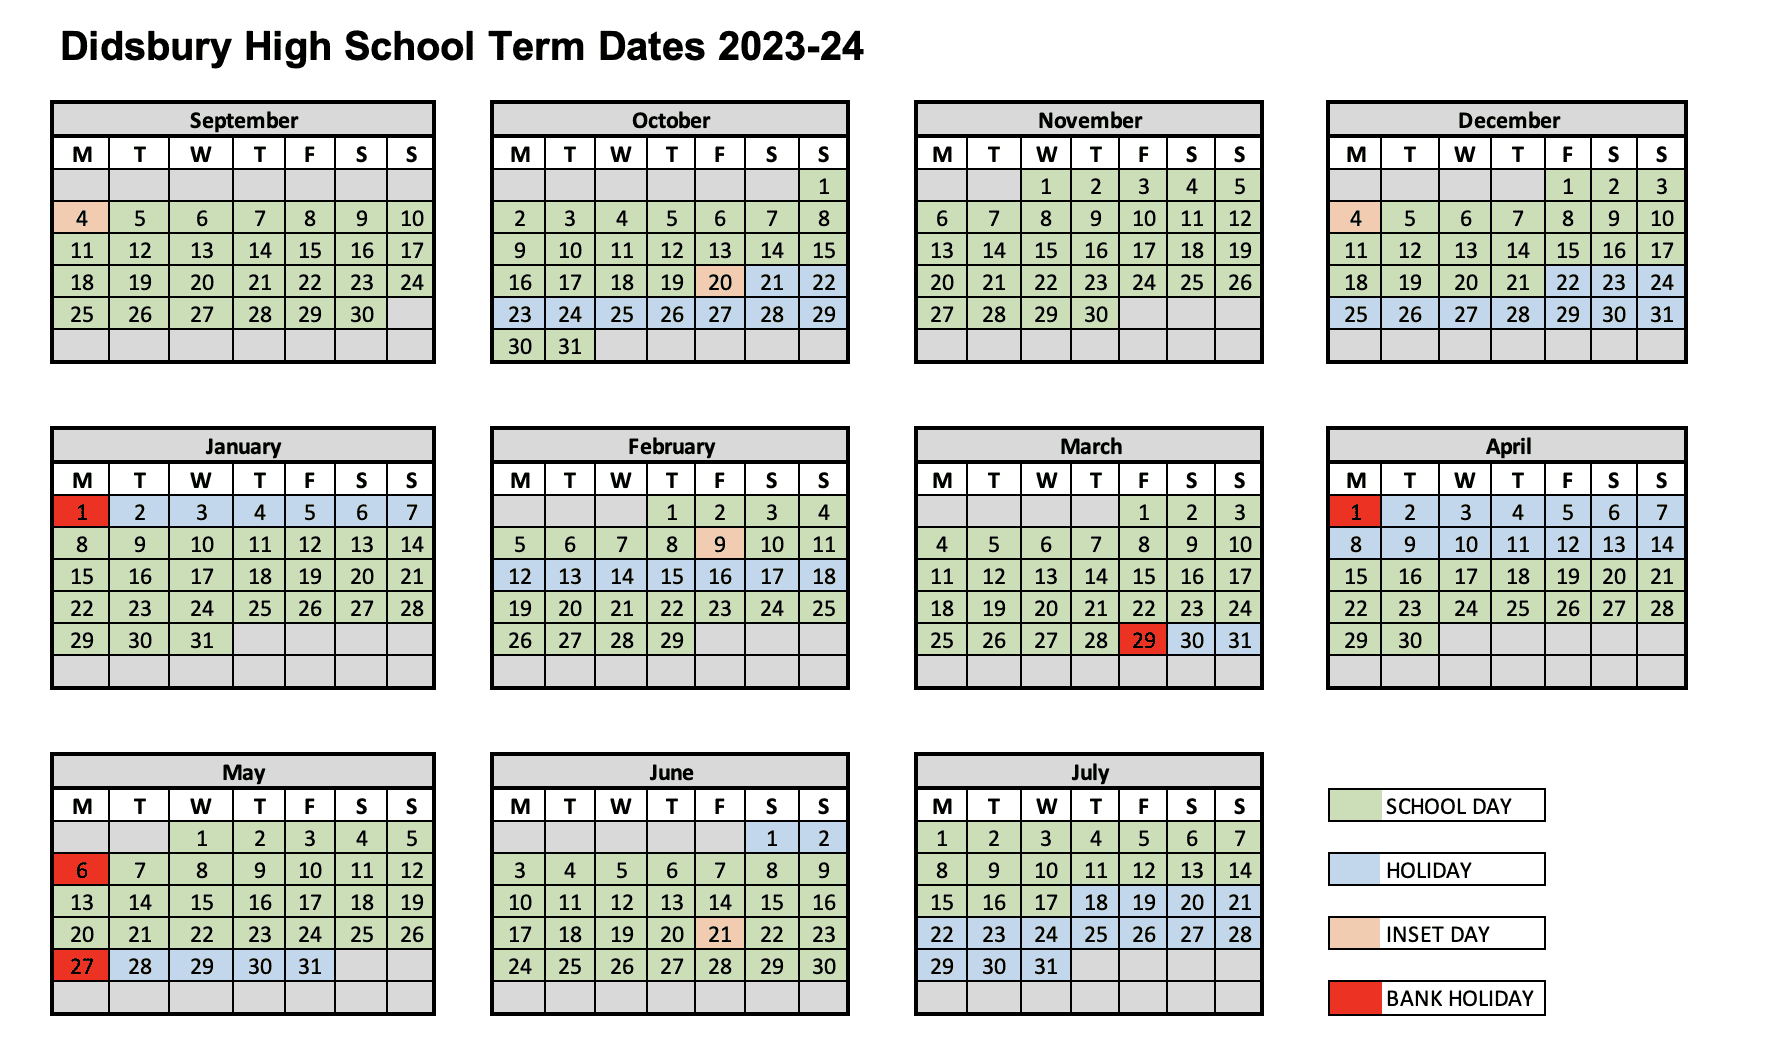 Didsbury High School Term Dates for the 2023-24 academic year.